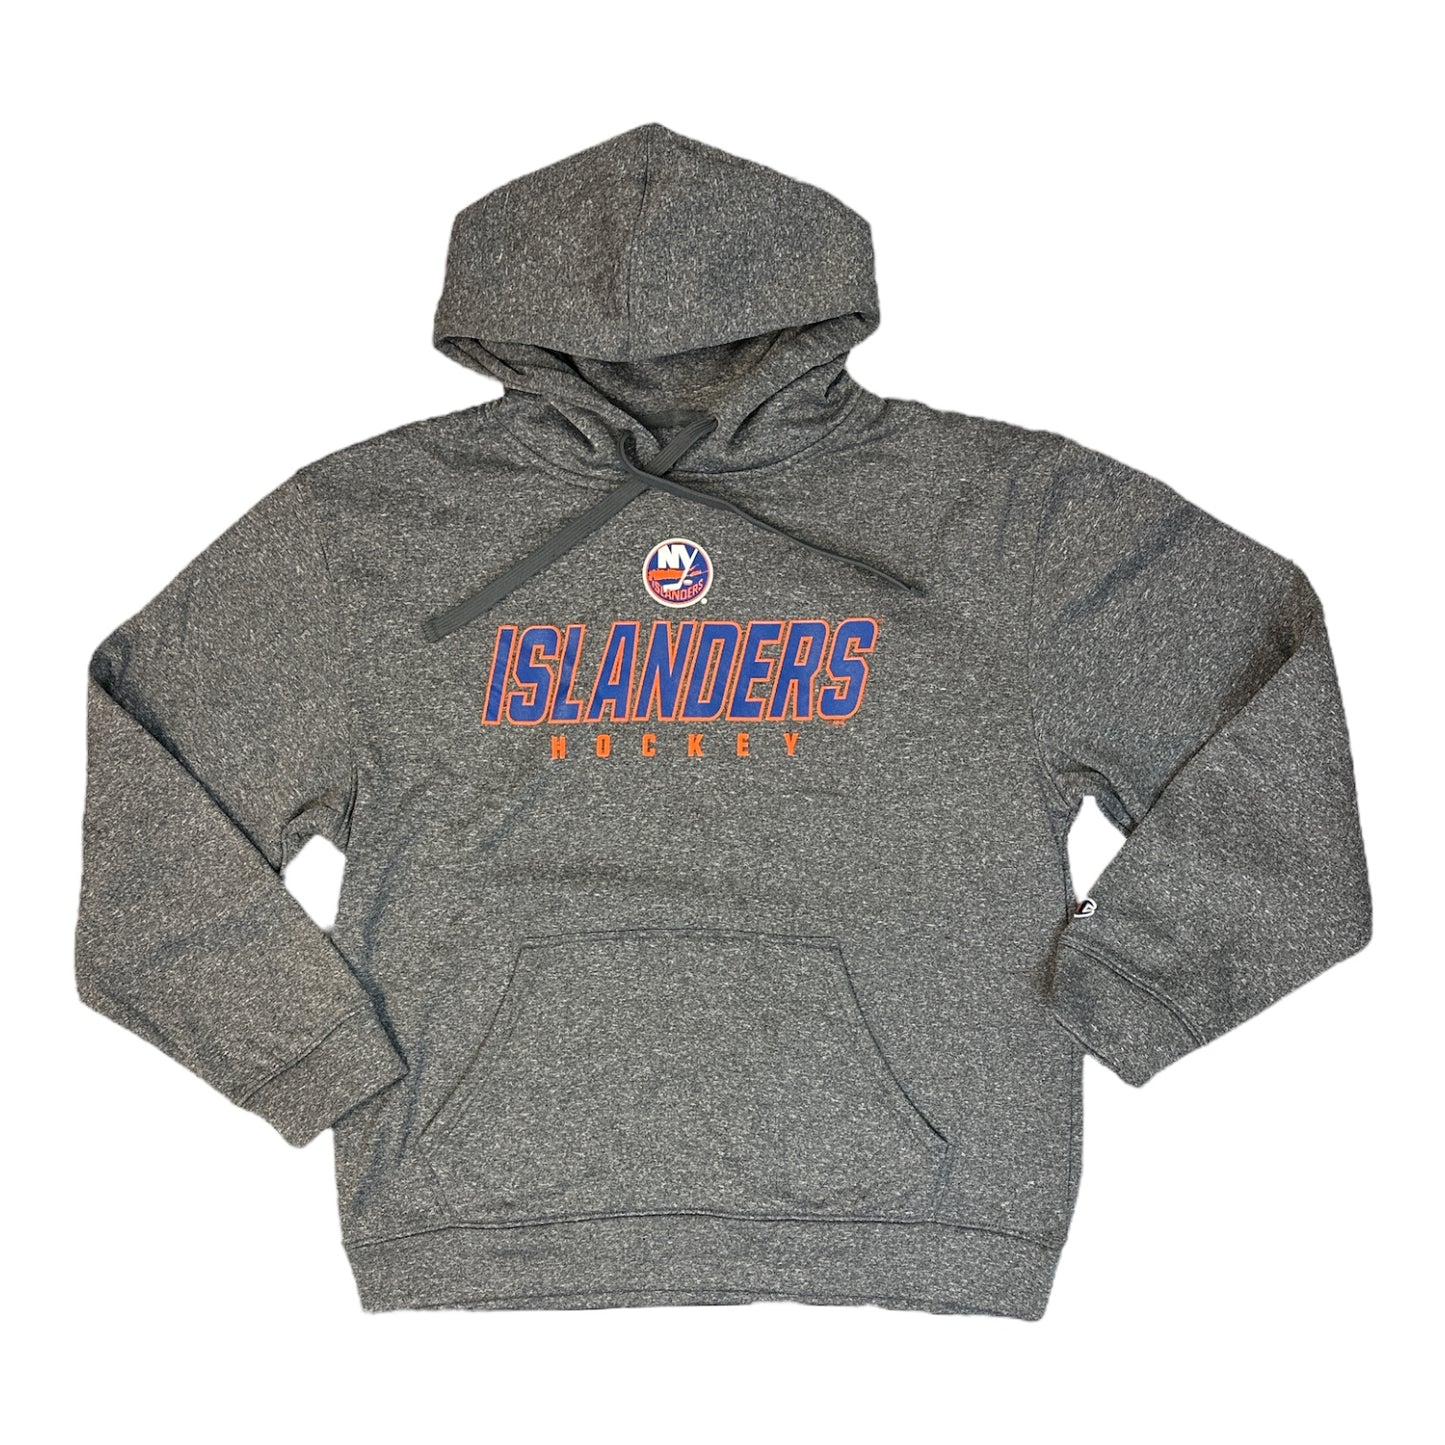 Champion Men's NHL Fleece Lined Pullover Hoodie